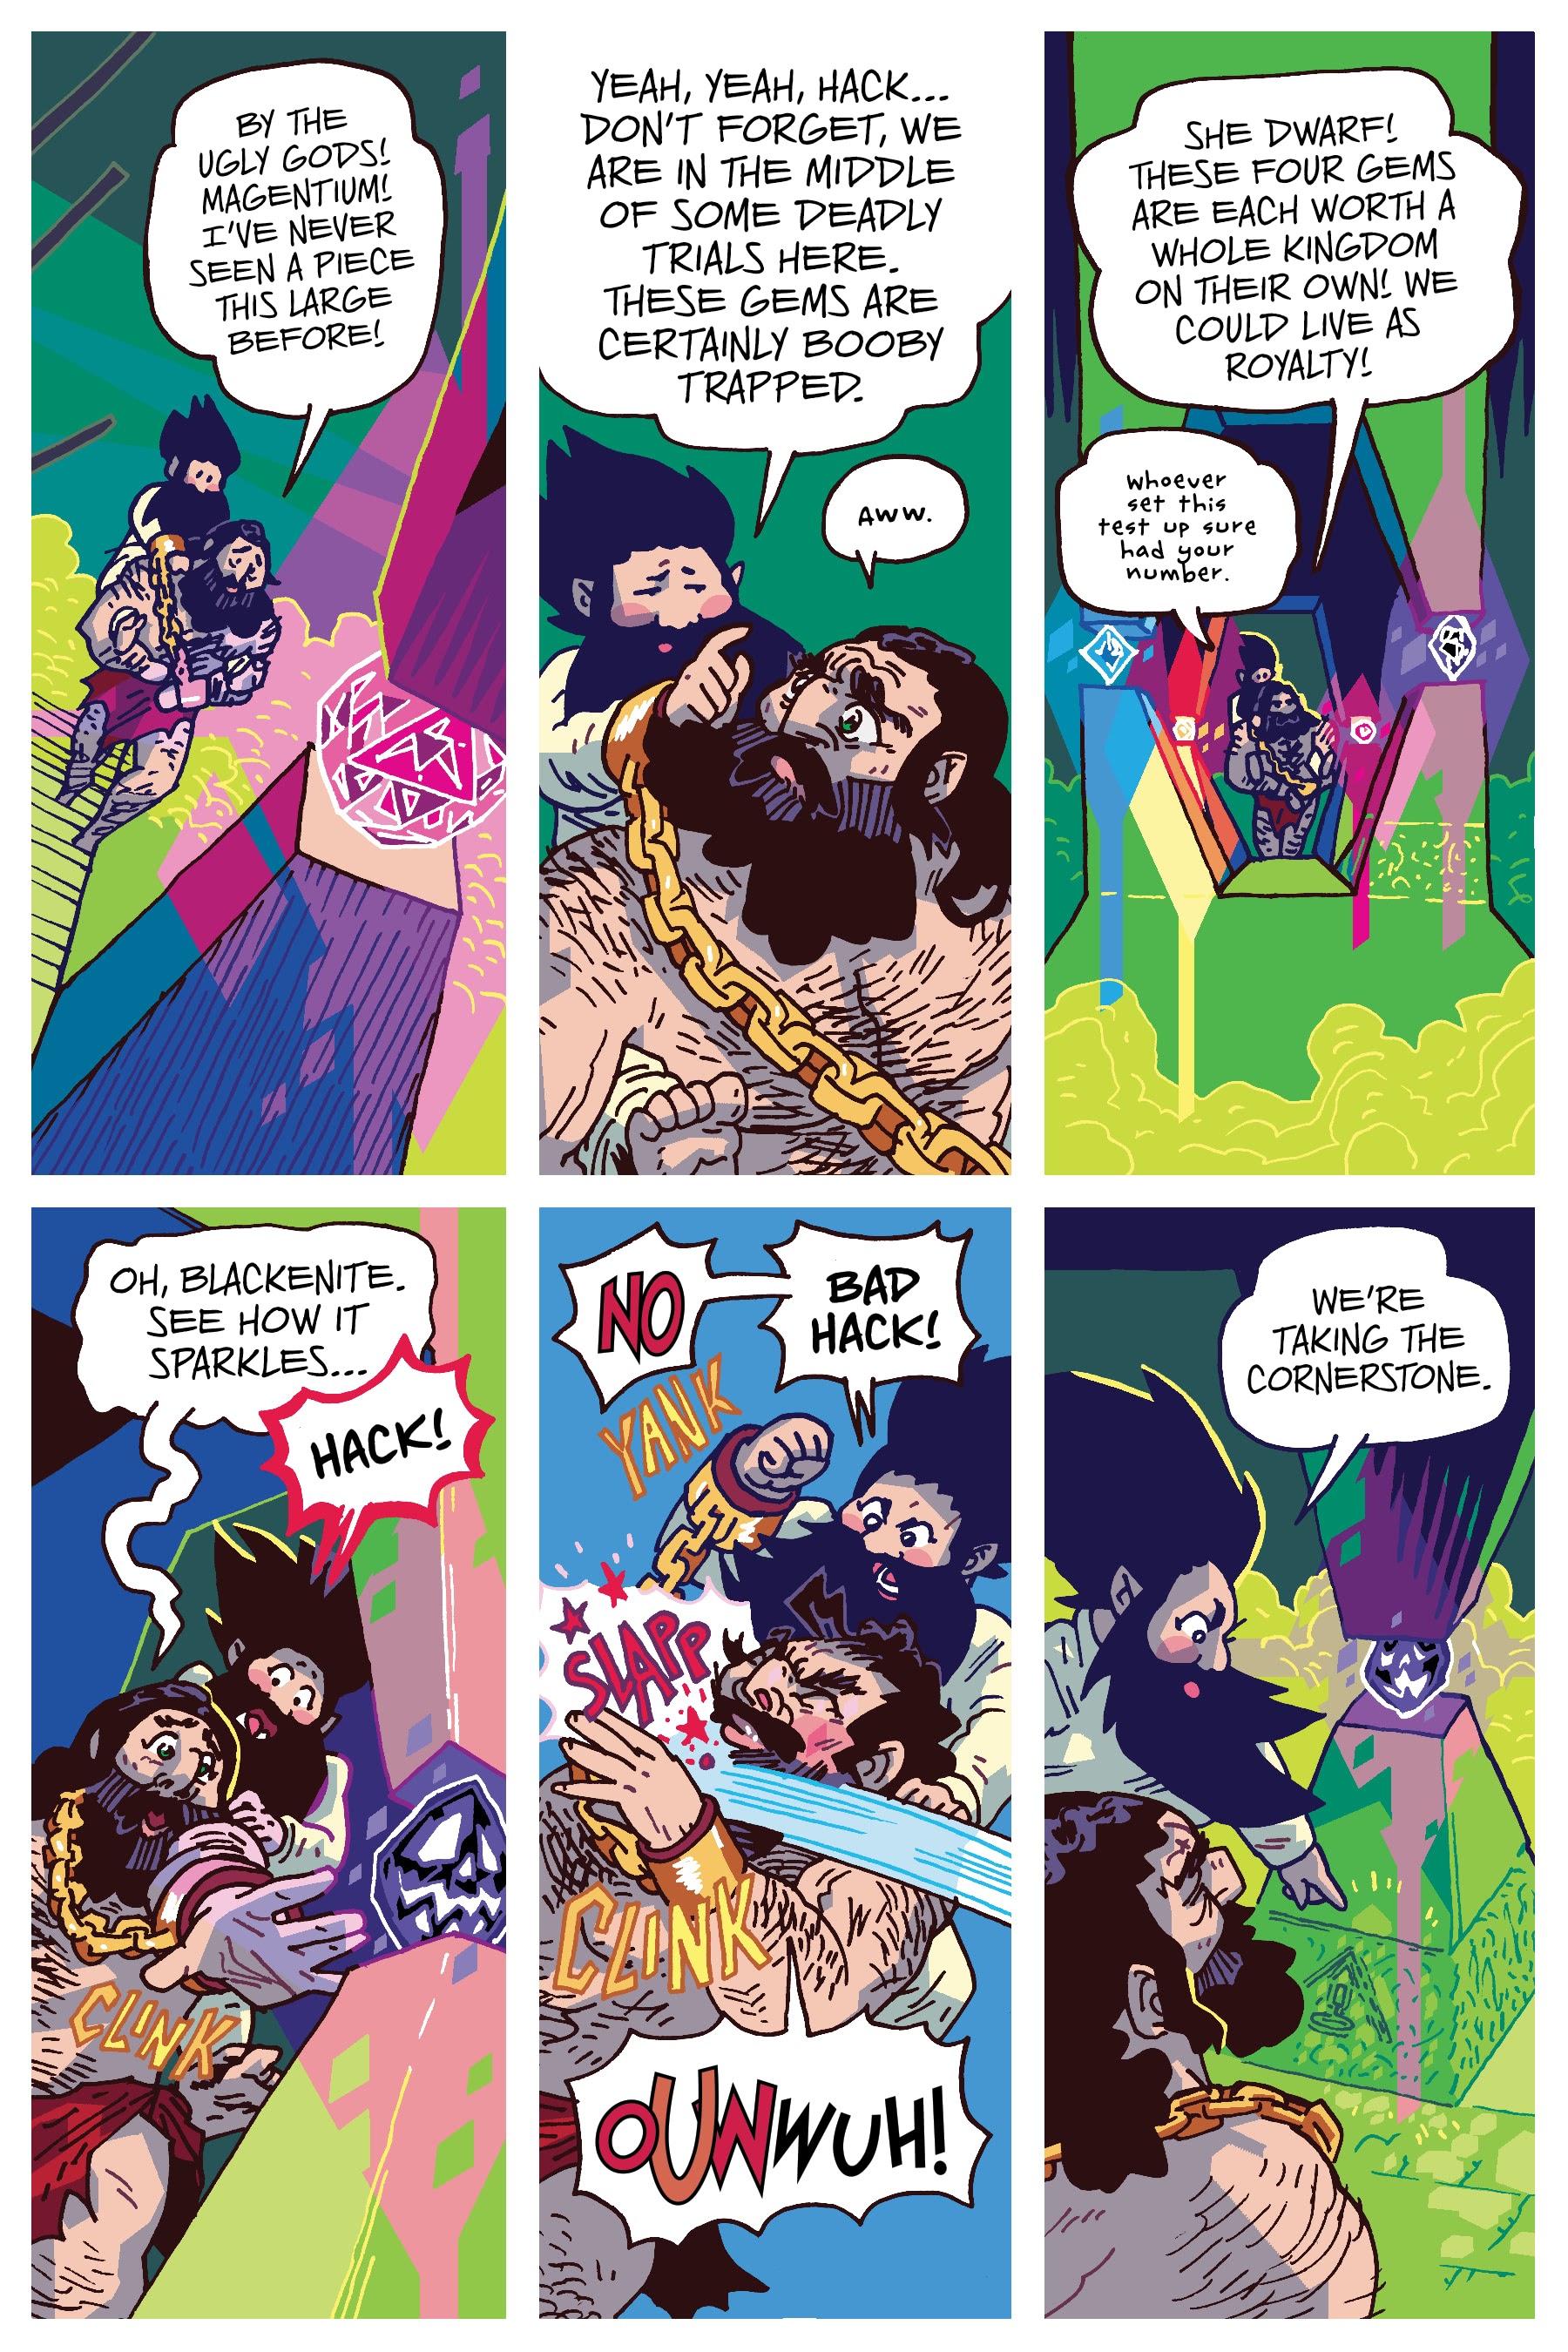 Read online The Savage Beard of She Dwarf comic -  Issue # TPB (Part 2) - 9